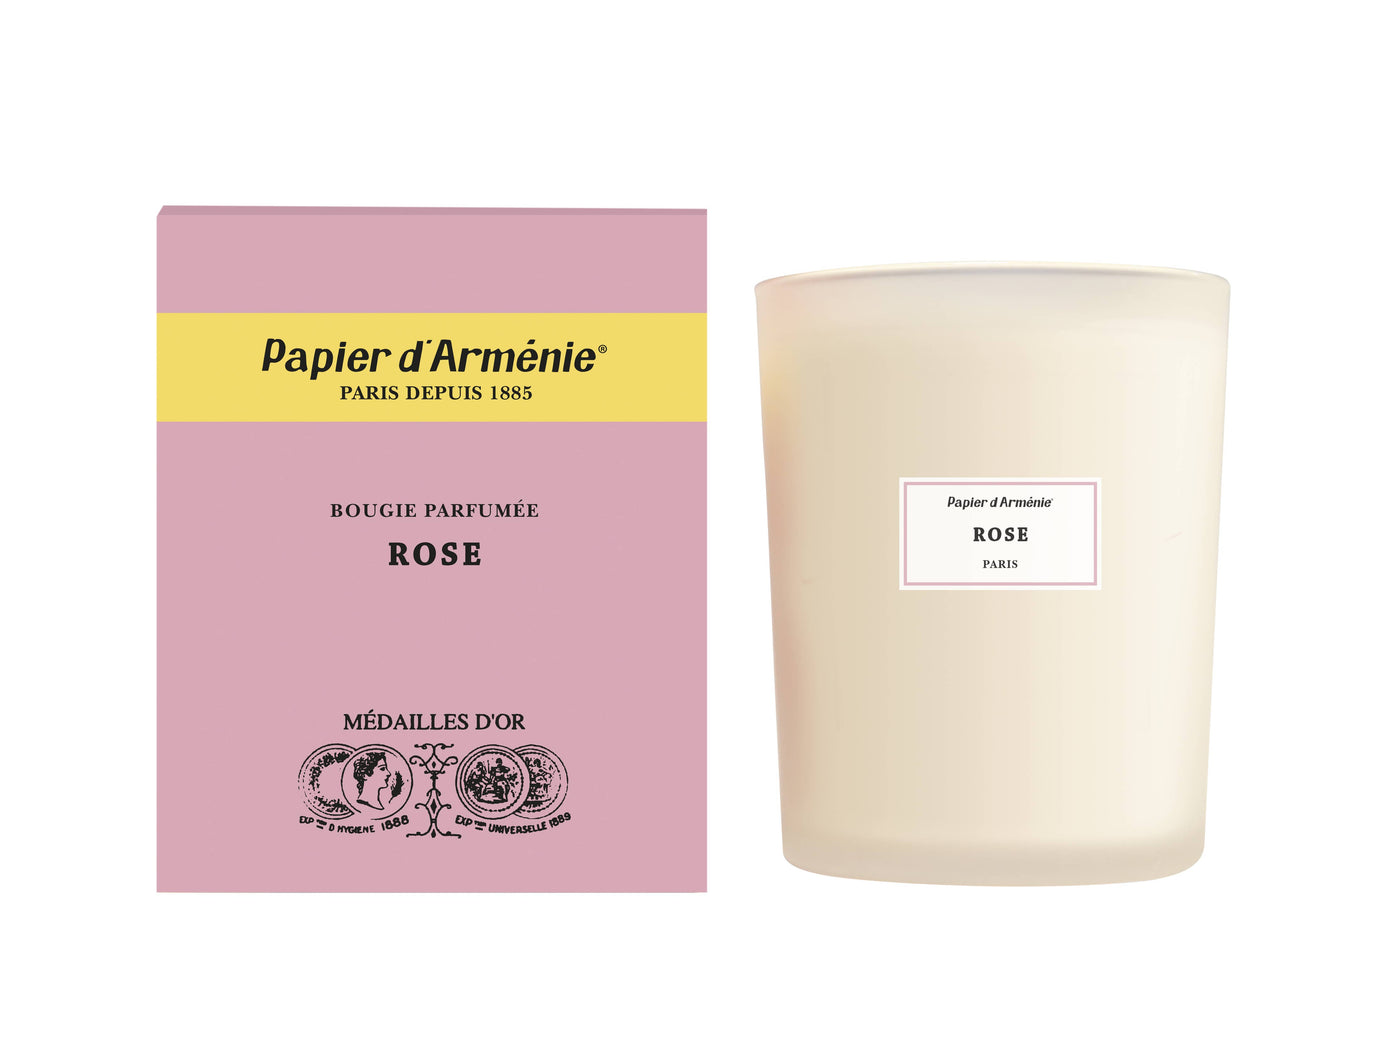 Papier d'Armenie 50 Hour Candle in Rose